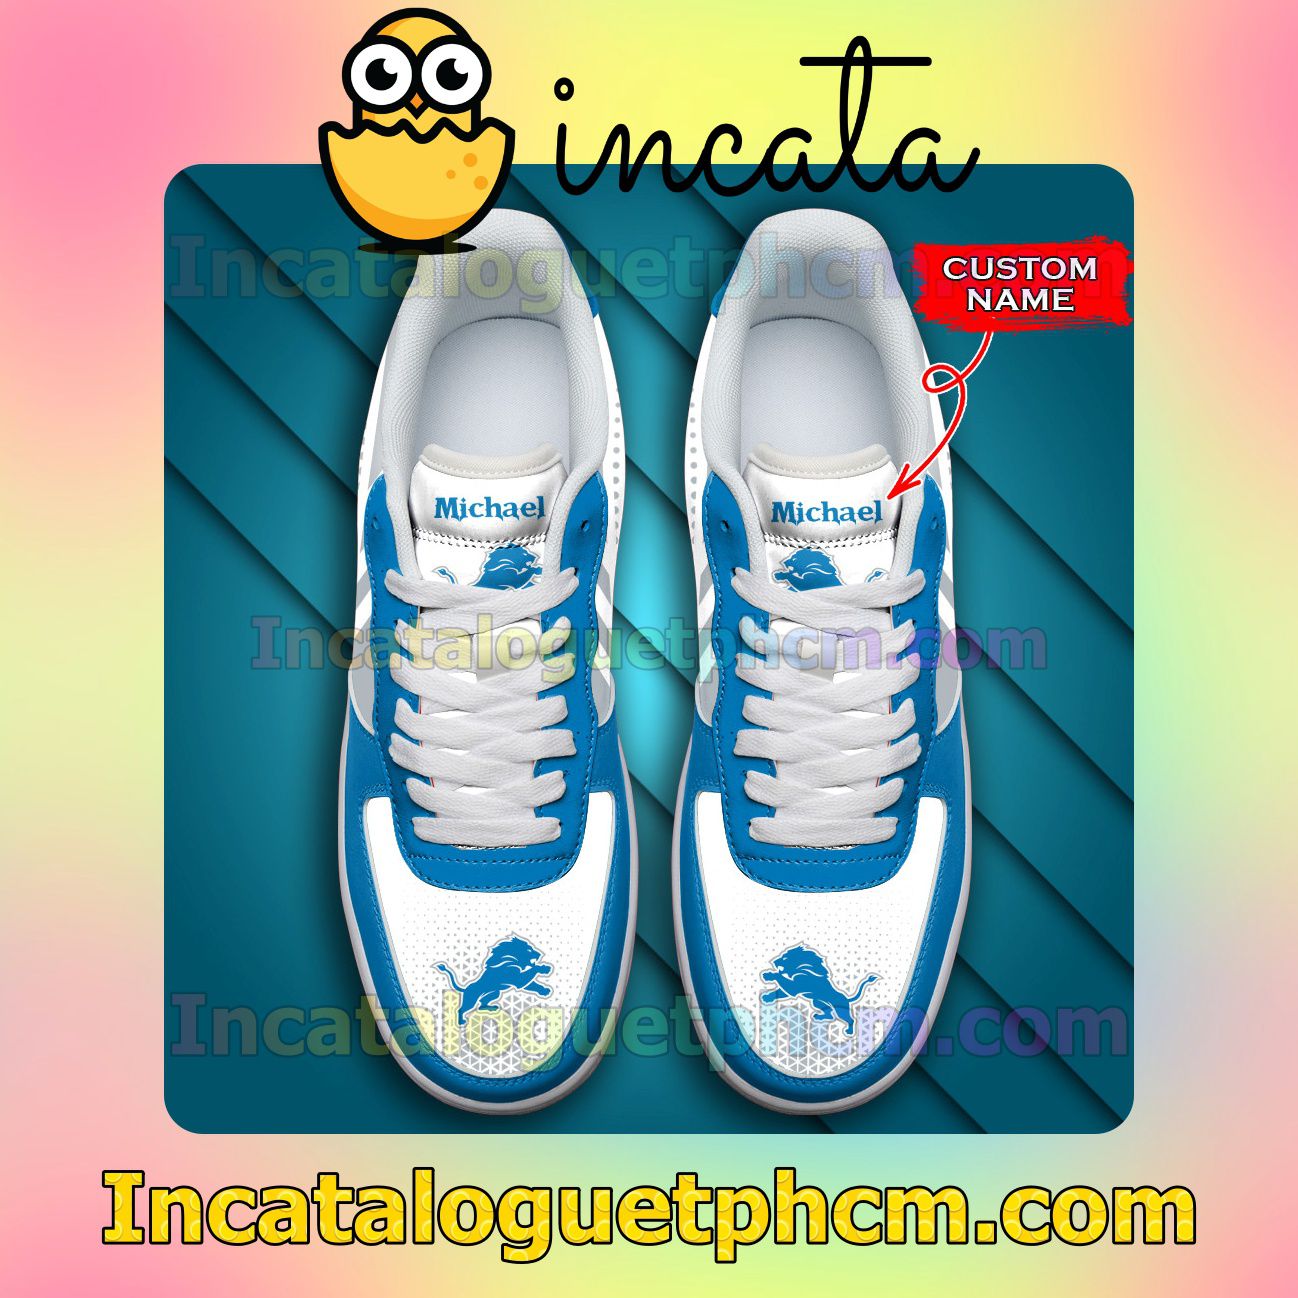 Sale Off Personalized NFL Detroit Lions Custom Name Nike Low Shoes Sneakers